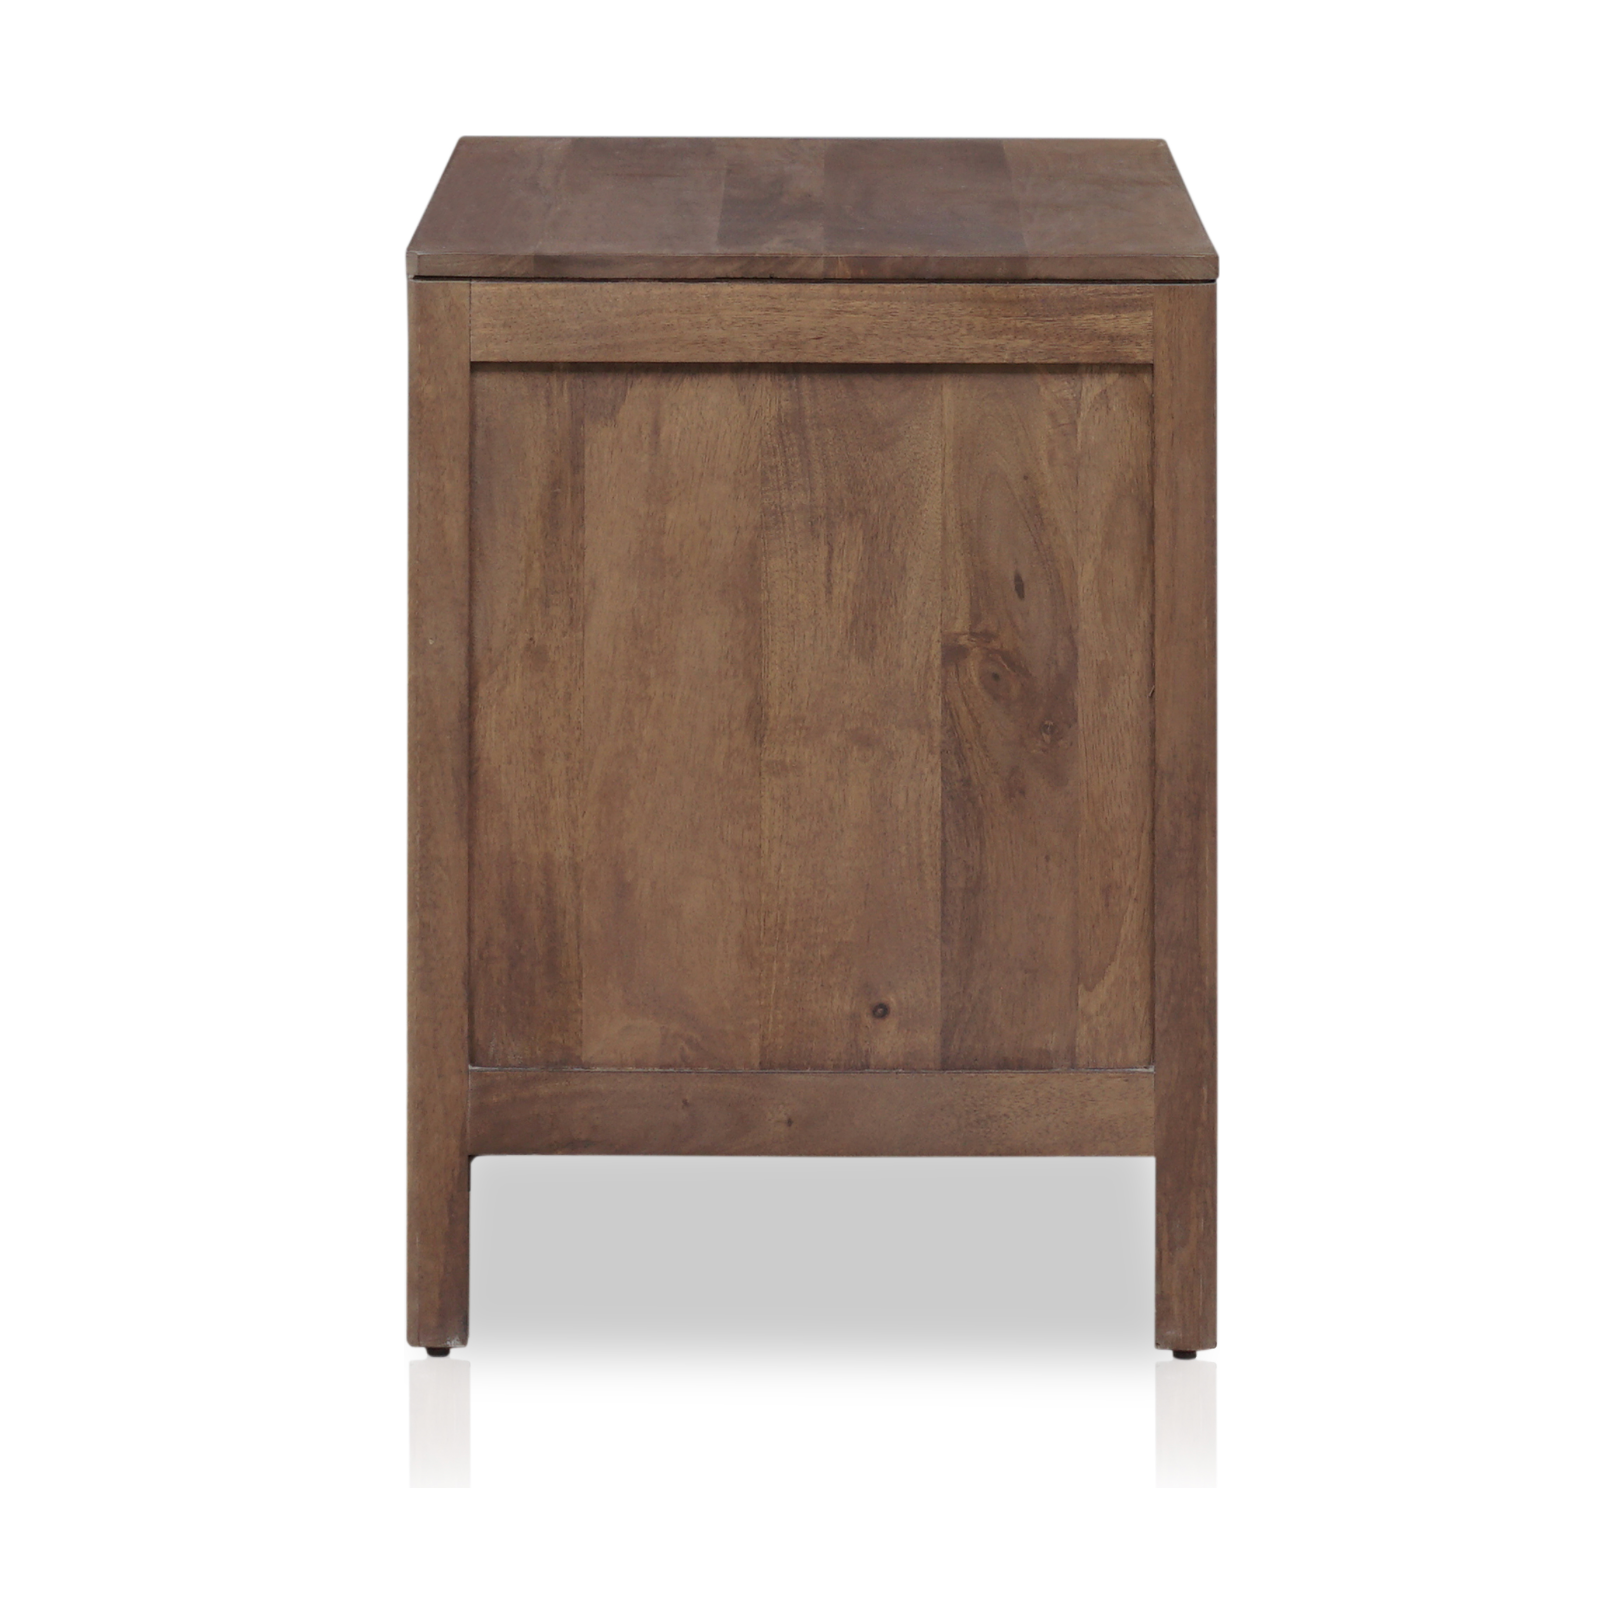 Brown wash mango frames inset woven cane, for a light, textural look with organic allure. Three spacious drawers provide plenty of closed storage. Amethyst Home provides interior design, new construction, custom furniture and area rugs in the Houston metro area